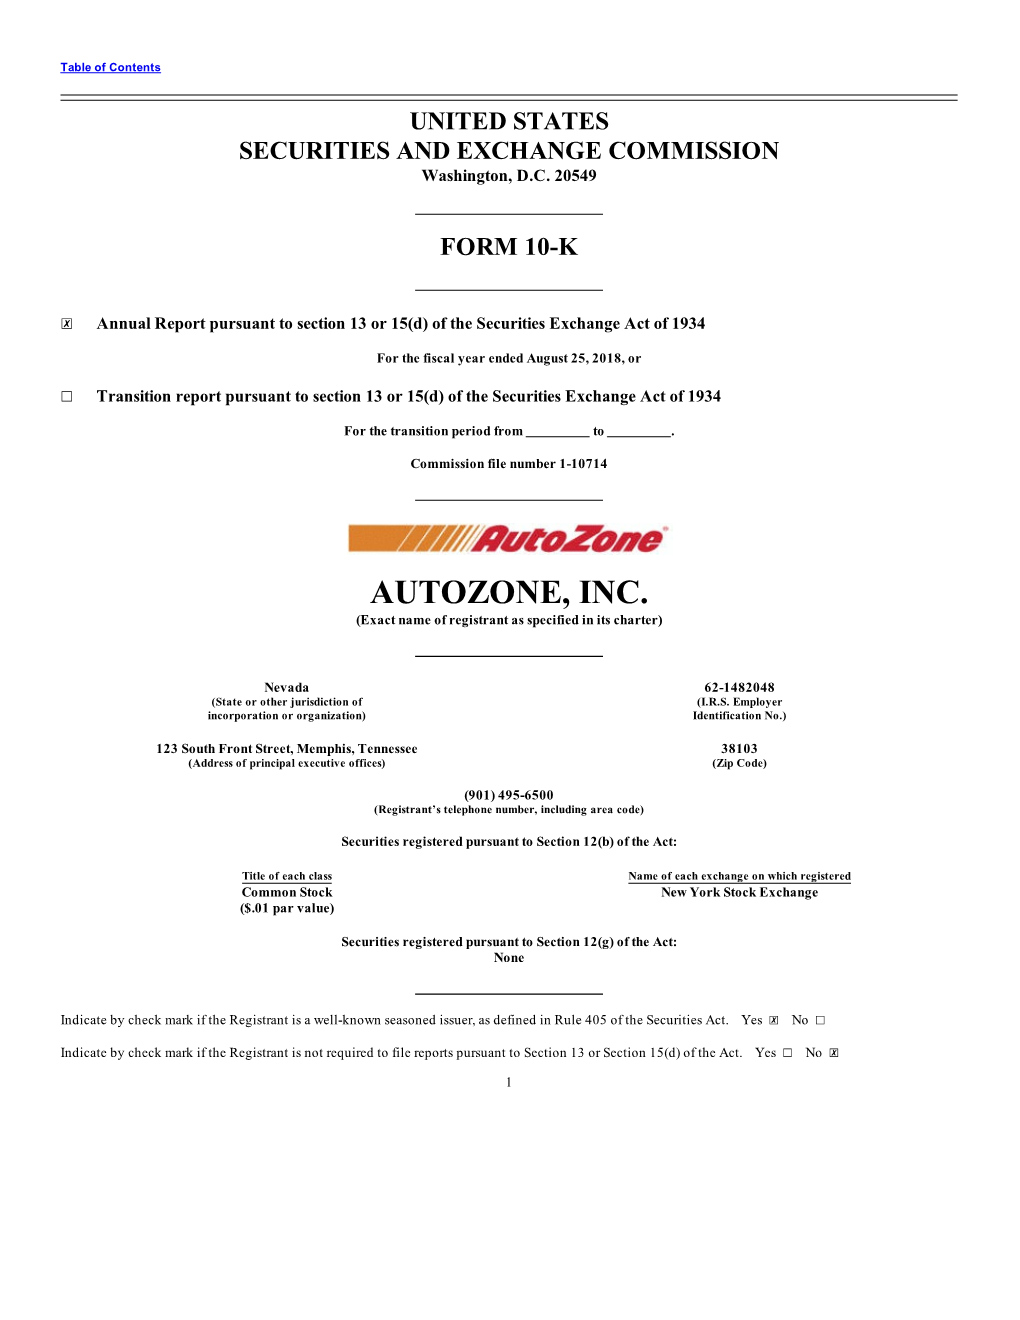 AUTOZONE, INC. (Exact Name of Registrant As Specified in Its Charter)